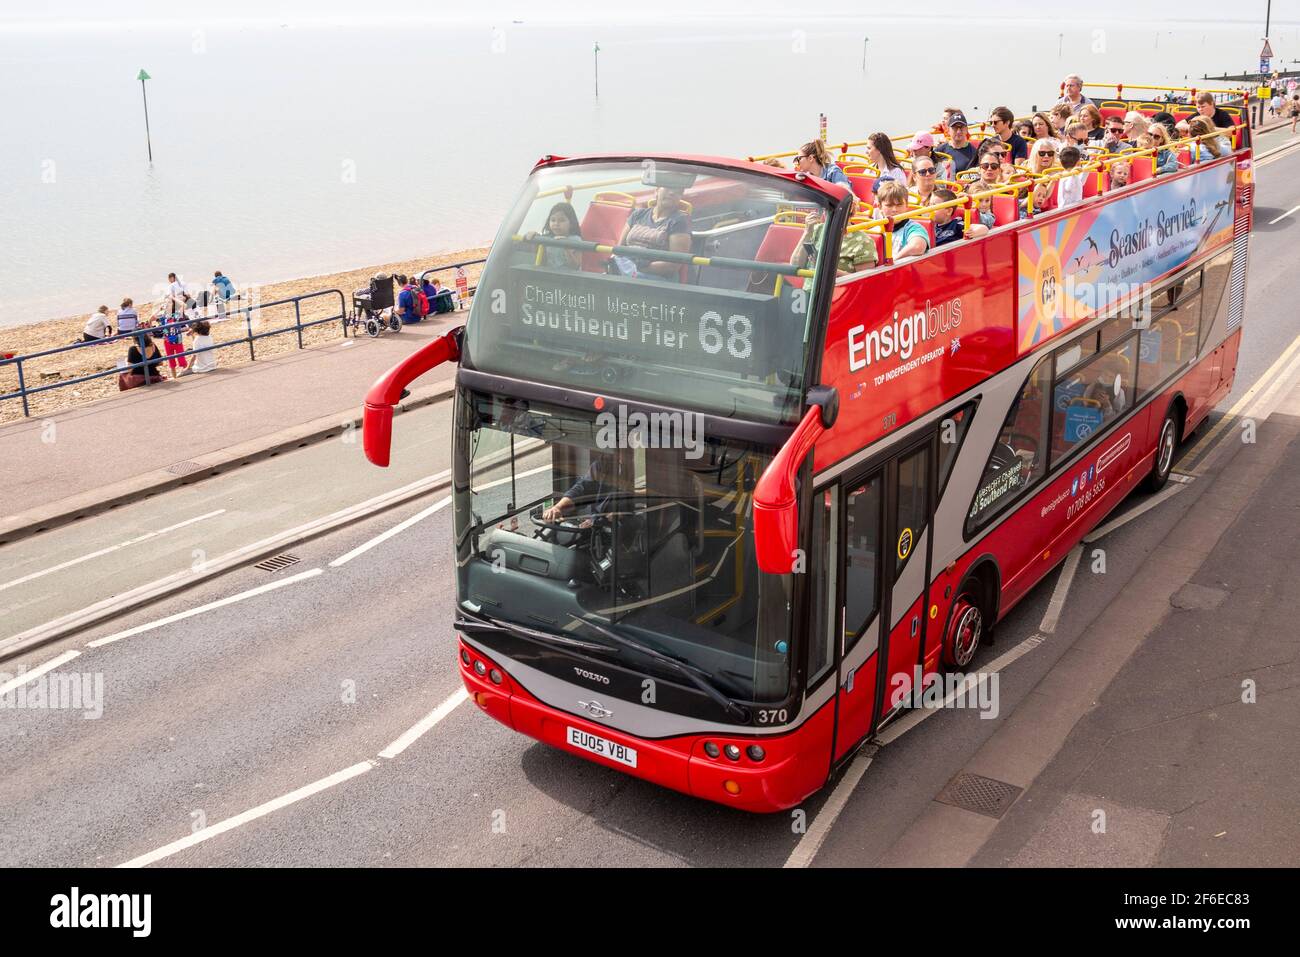 Southend on Sea, Essex, UK. 31st Mar, 2021. The last day of March has been hot and bright in Southend, but very hazy over the Thames Estuary. Ensignbus added additional buses to their seafront 'Seaside Service' open top bus service due to popular demand. Passengers enjoying the view of the seafront from the top deck Stock Photo